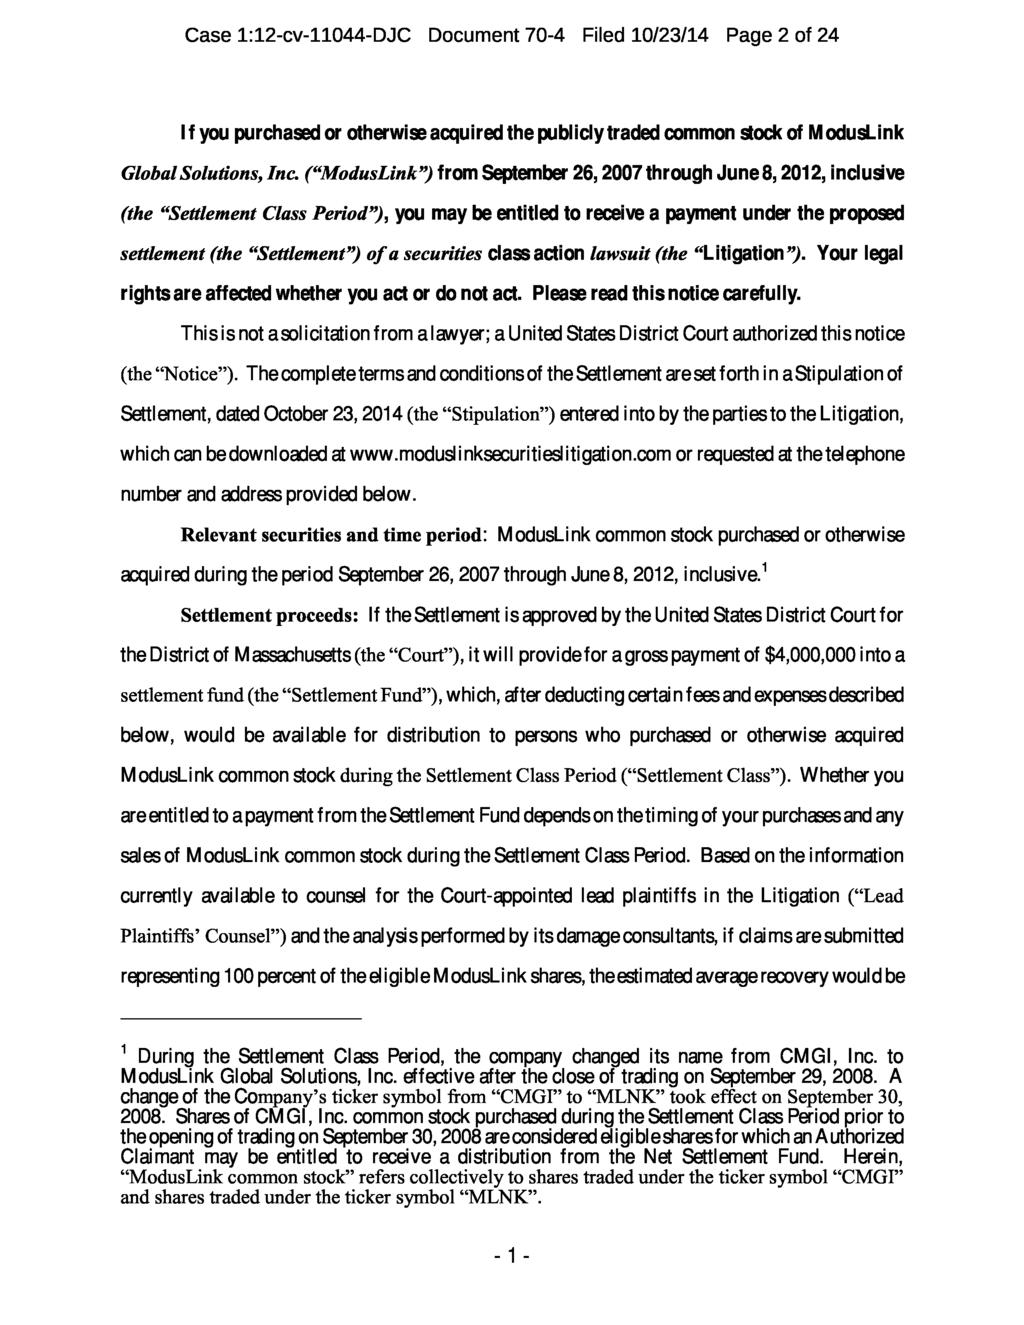 Case 1:12-cv-11044-DJC Document 70-4 Filed 10/23/14 Page 2 of 24 If you purchased or otherwise acquired the publicly traded common stock of ModusLink Global Solutions, Inc.